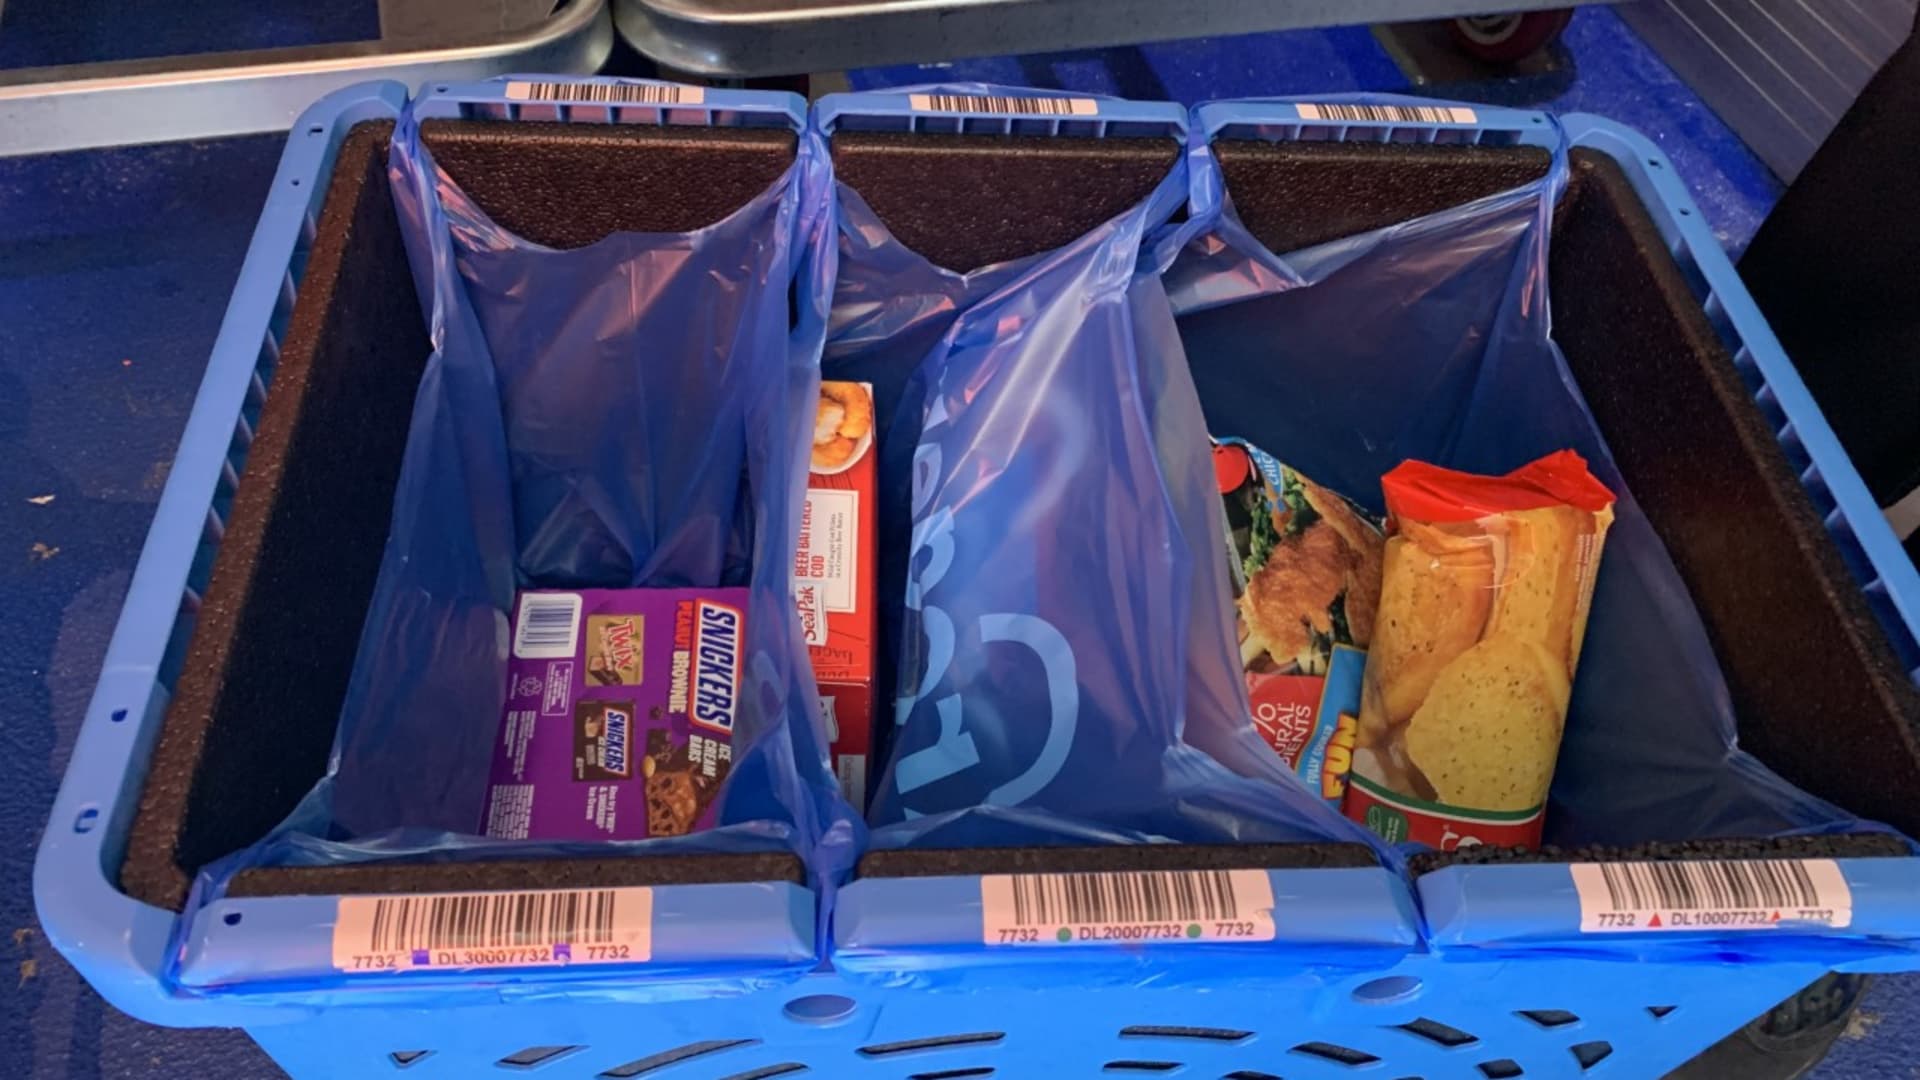 Groceries are picked by employees and put into bags inside of plastic totes. The totes are color-coded.